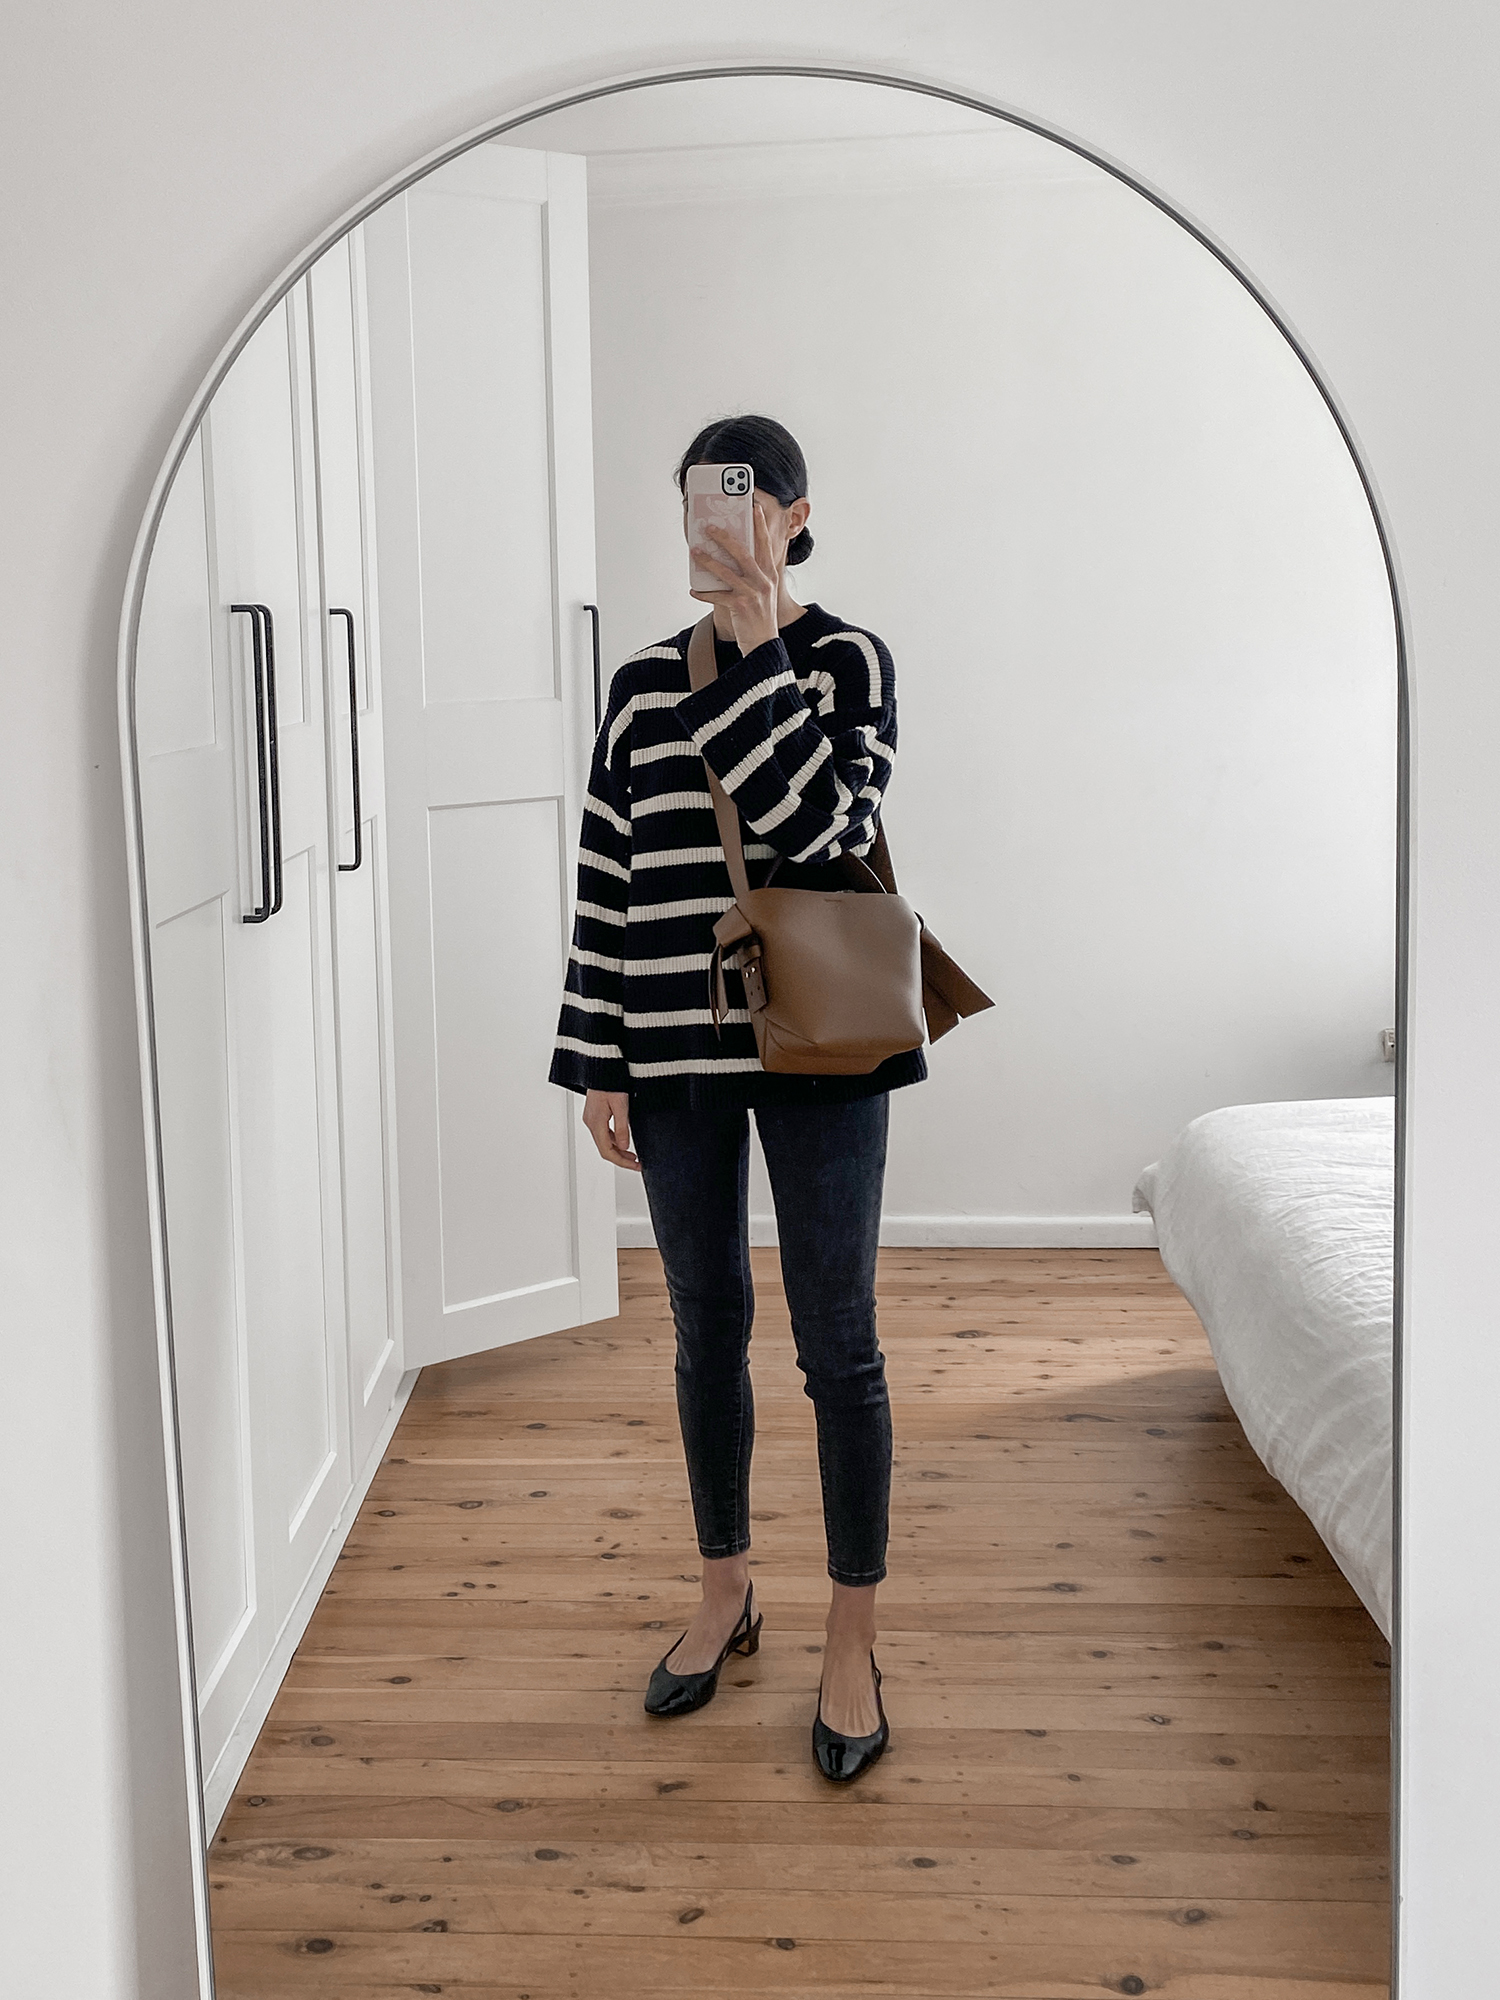 H&M striped knit sweater with Everlane skinny jeans